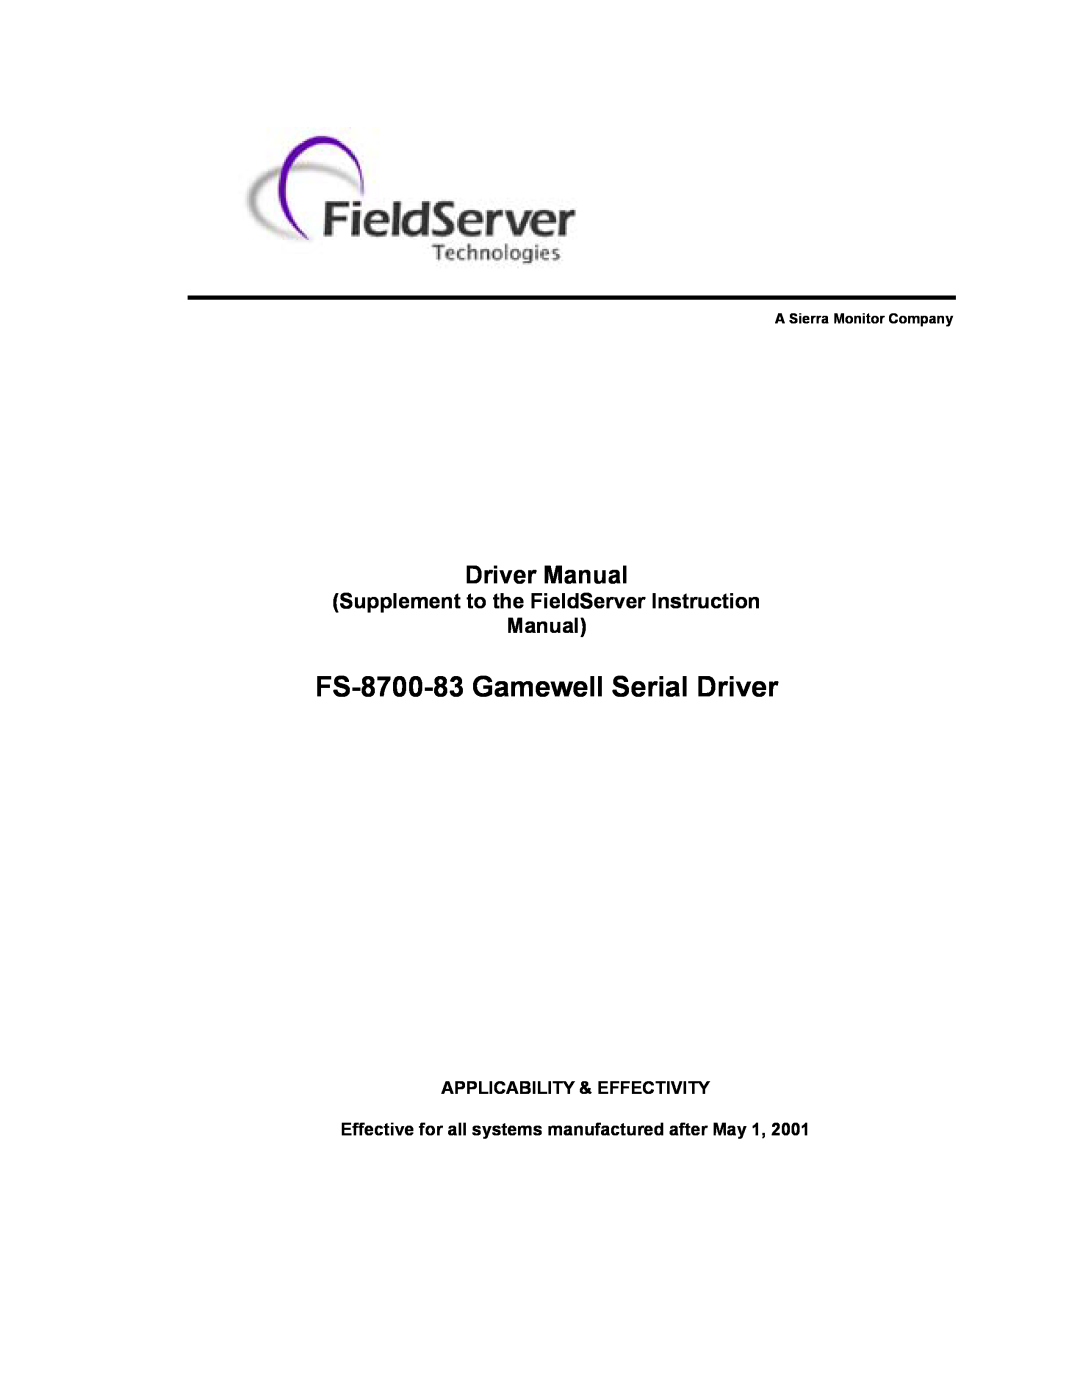 FieldServer instruction manual FS-8700-83 Gamewell Serial Driver, Supplement to the FieldServer Instruction Manual 